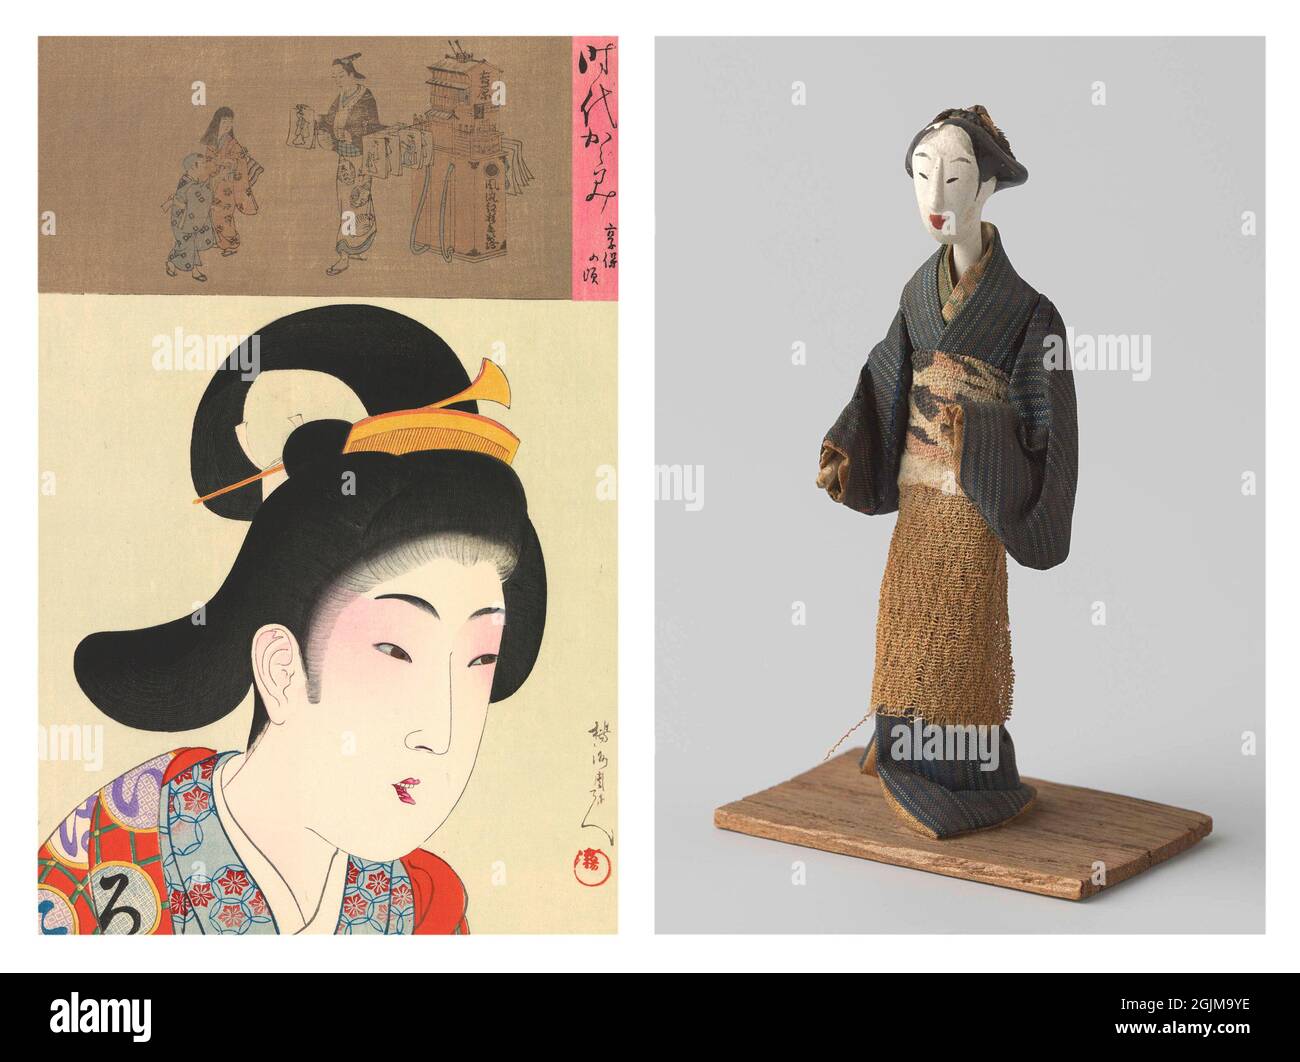 Unique optimised and enhanced arrangement of an antique Japanese doll and a nineteenth century woodcut depicting a Japanese woman in a kimono (above, a print dealer holding prints) Stock Photo